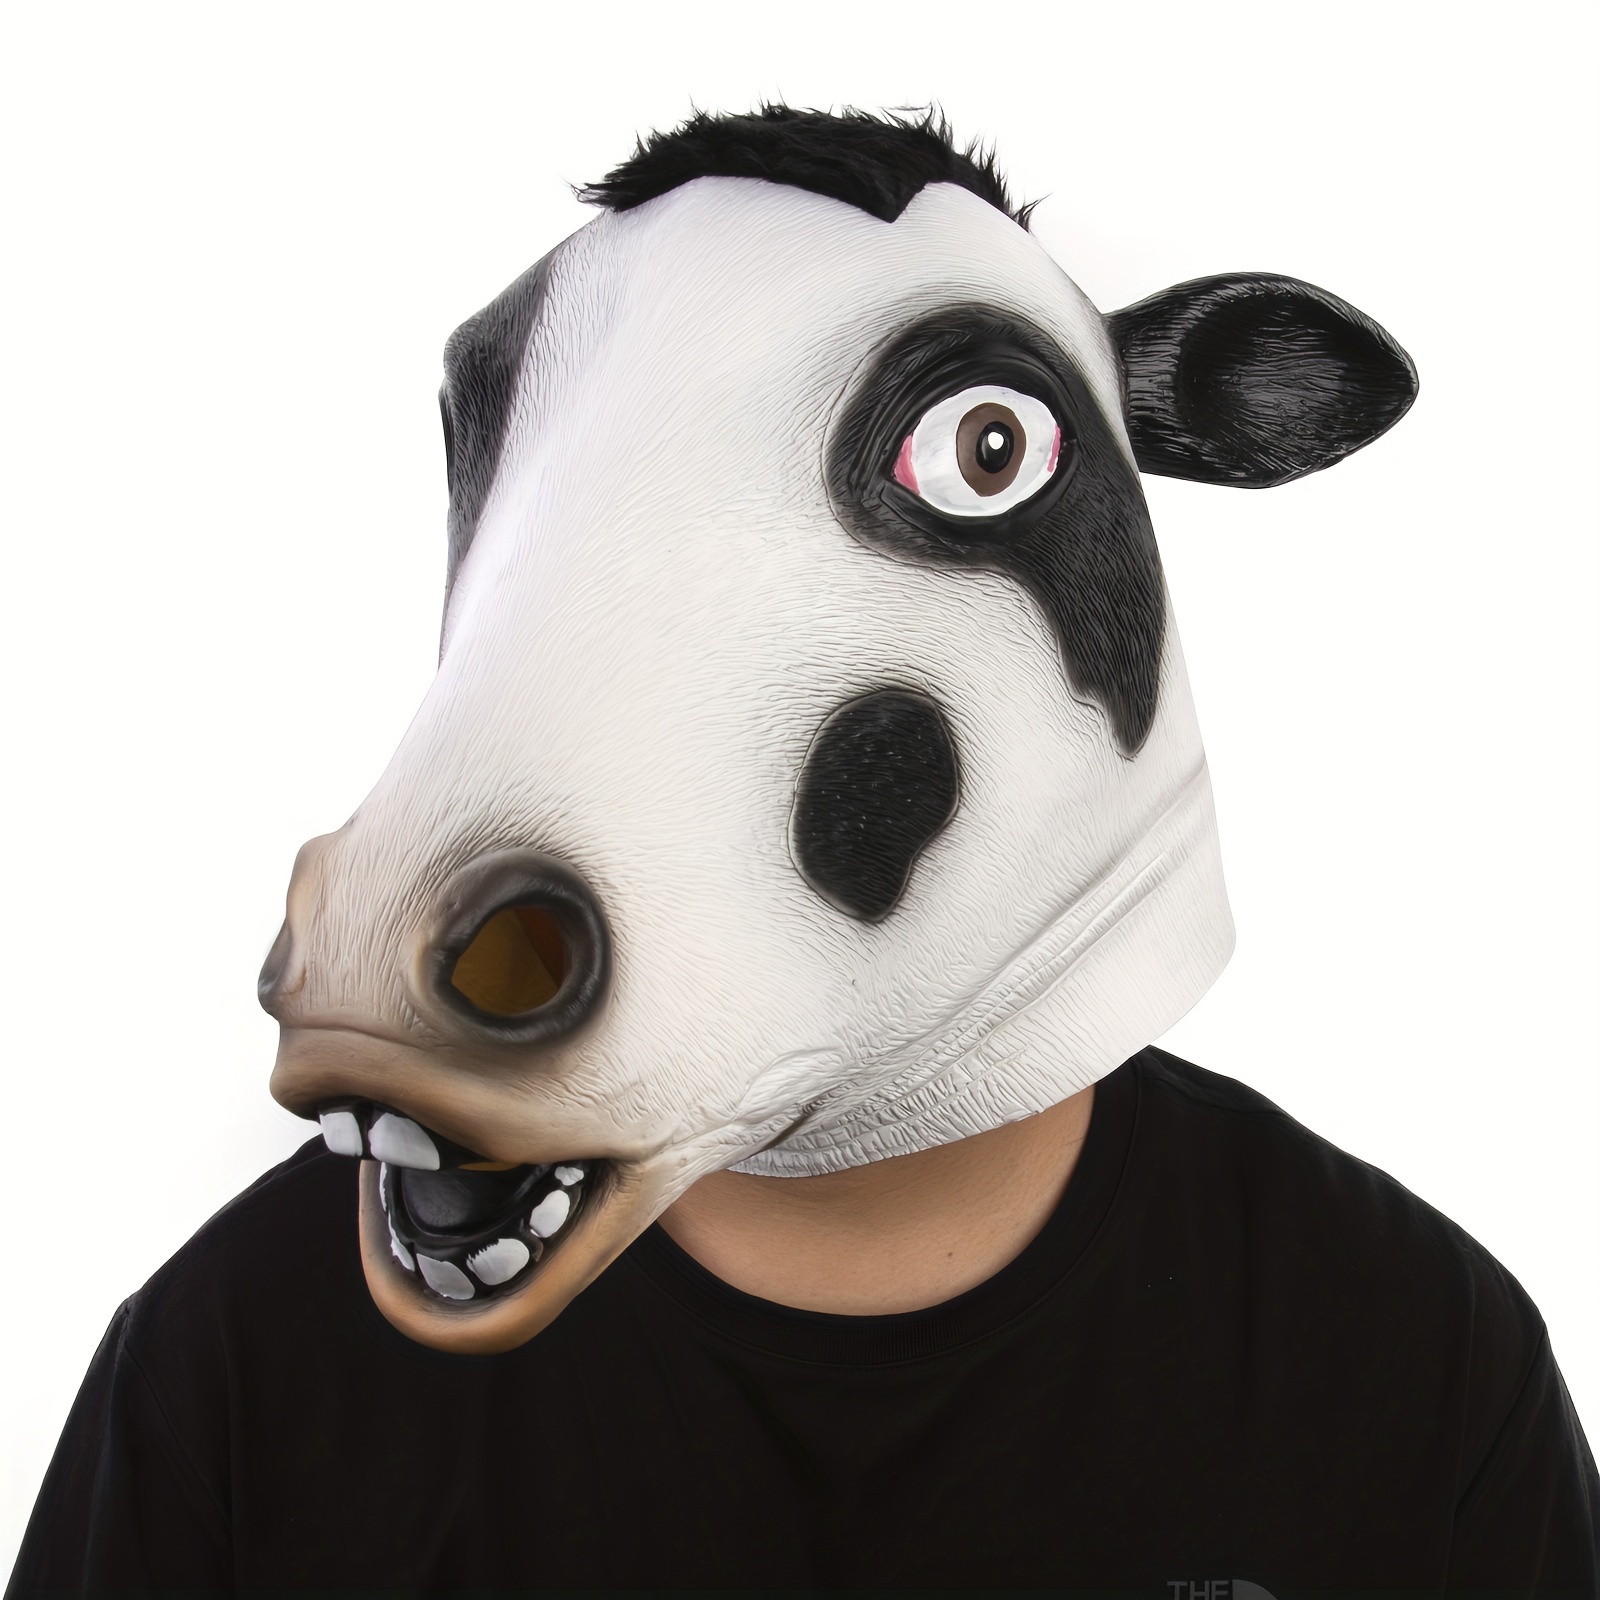 Pig Head Mask Therian Animal Latex Mascara Furry Horse Donkey Helmet Rave  Cosplay Novelty Clothes Halloween Costume For Men